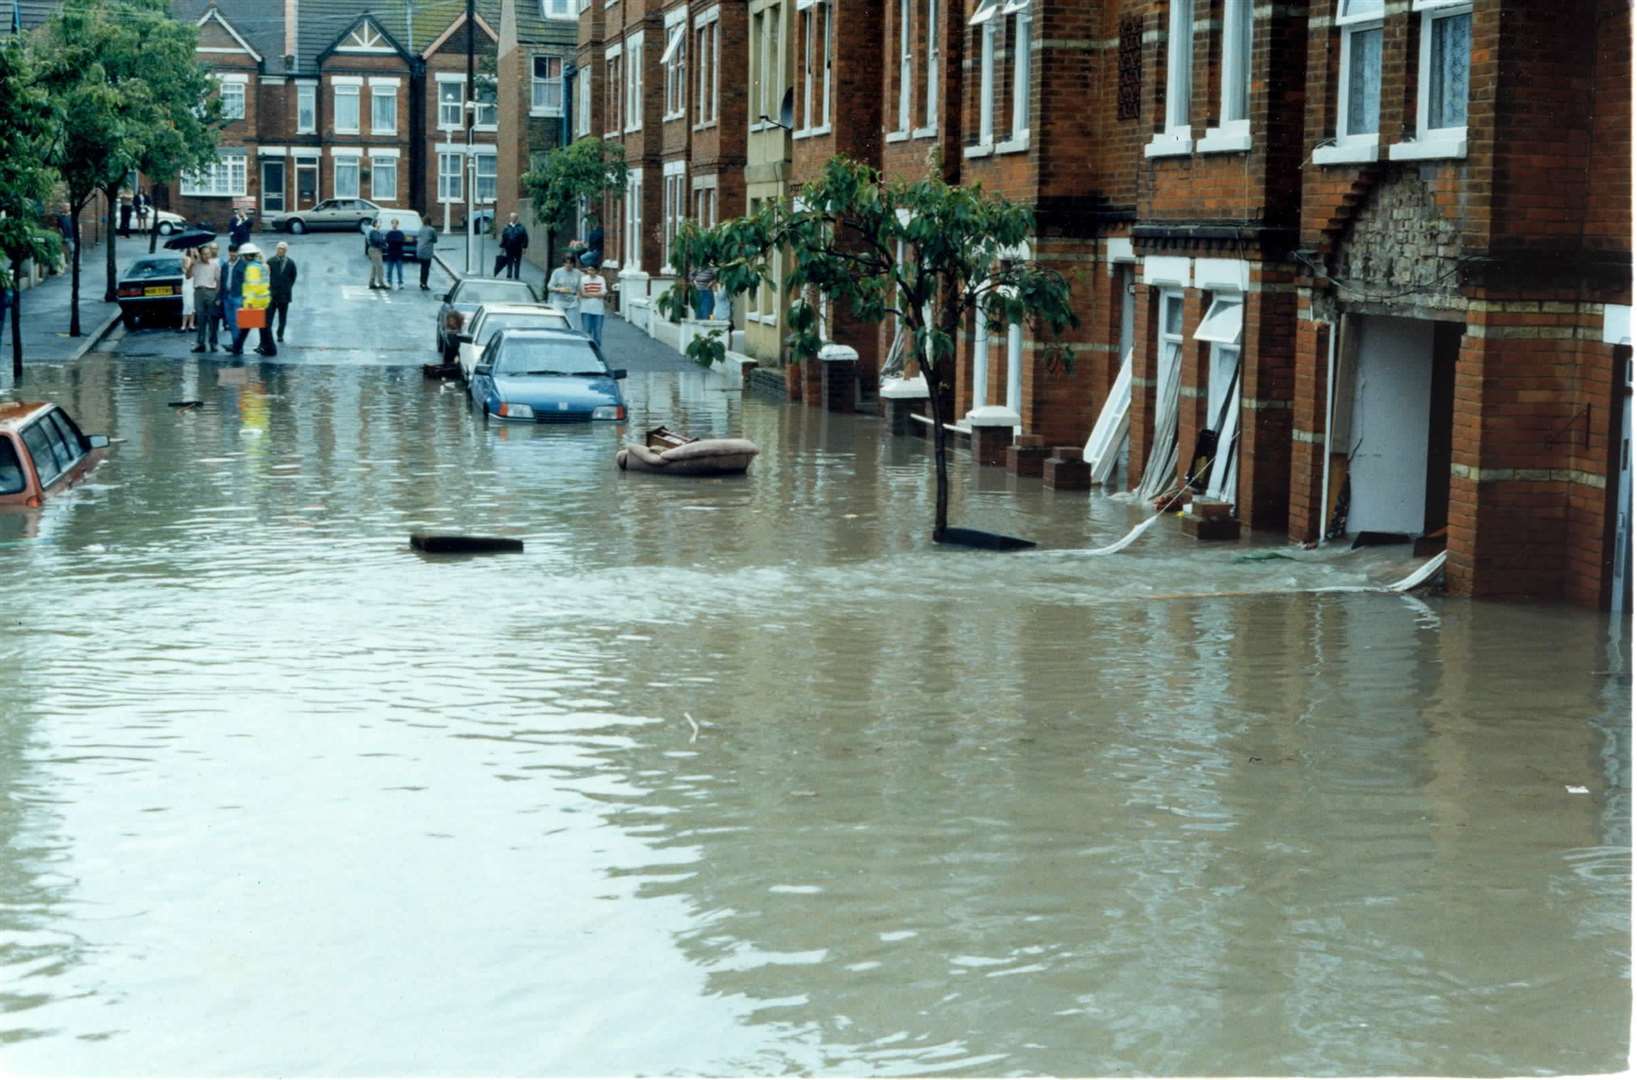 Flooding in Folkestone in August 1996. Picture: Max Hess